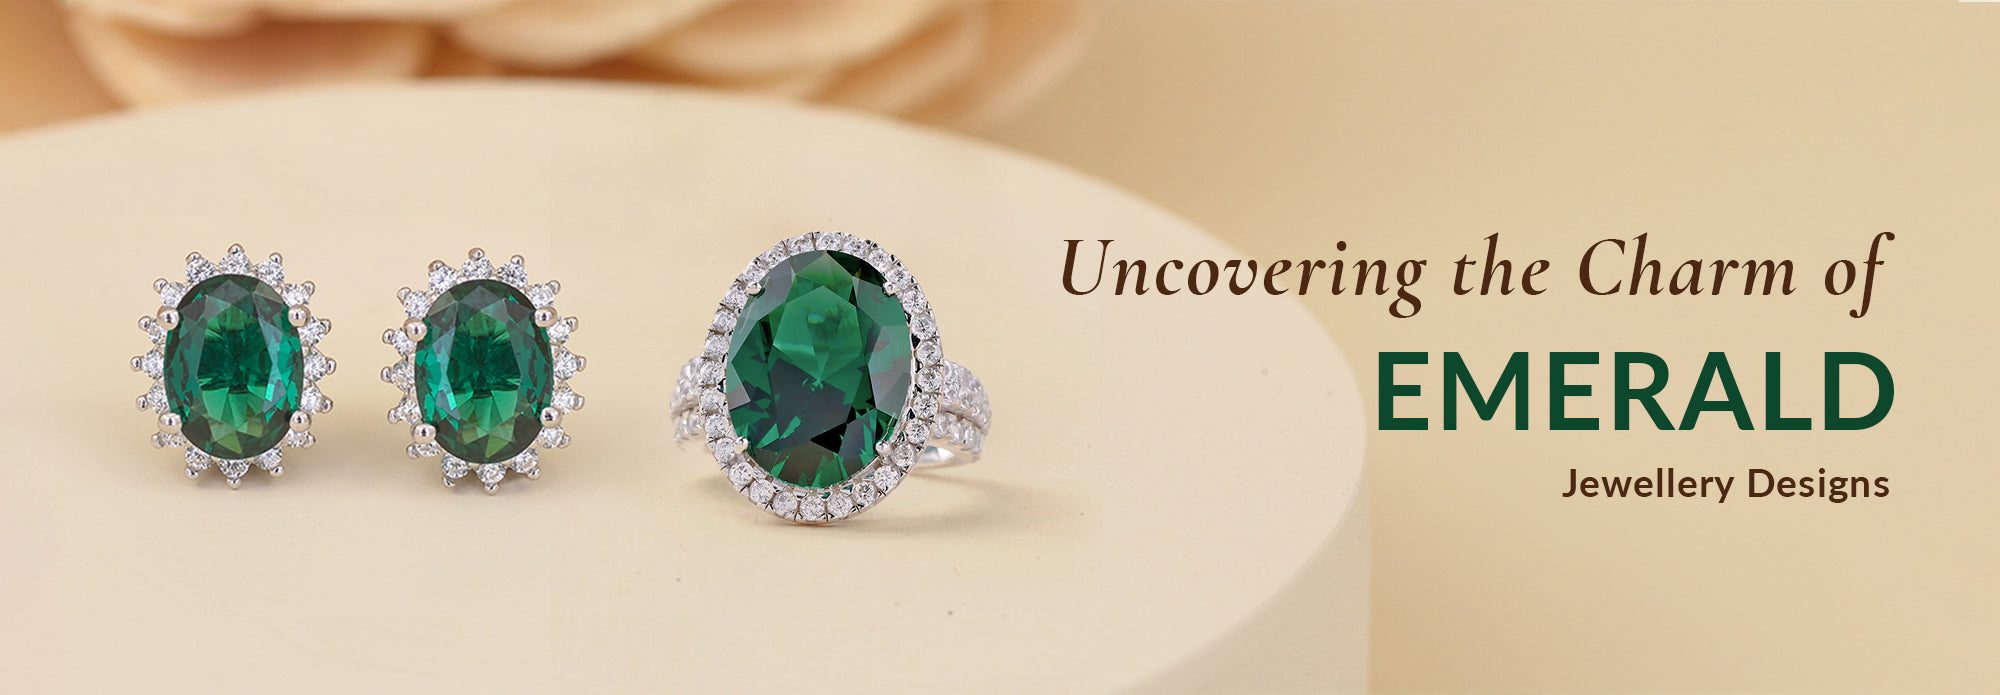 Embracing Emeralds: Uncovering the Charm of Emerald Jewellery Designs